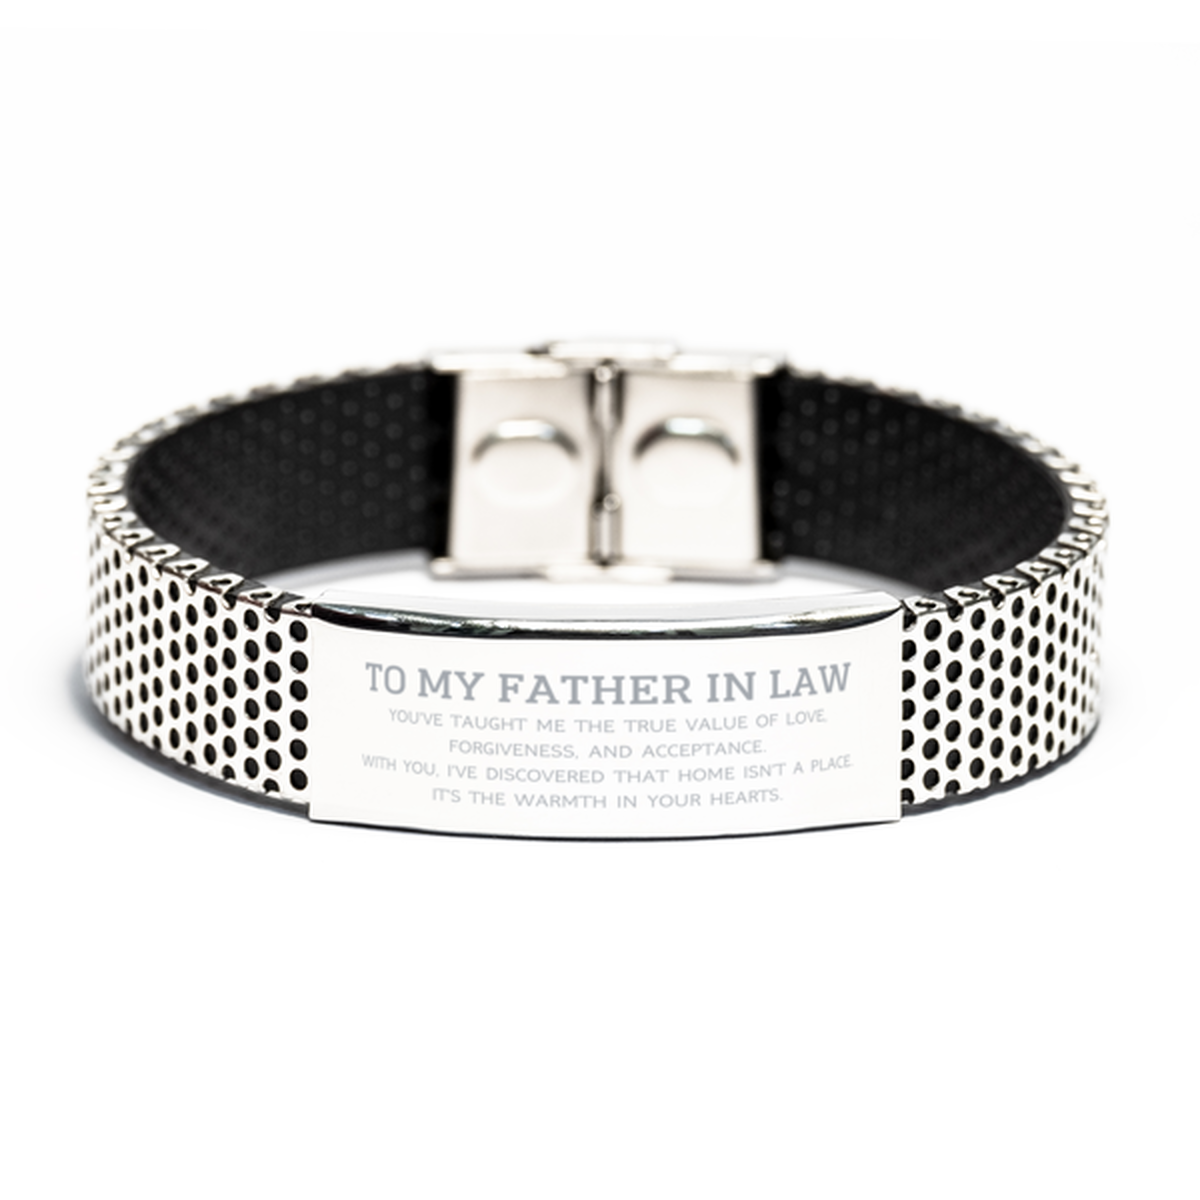 To My Father In Law Gifts, You've taught me the true value of love, Thank You Gifts For Father In Law, Birthday Stainless Steel Bracelet For Father In Law